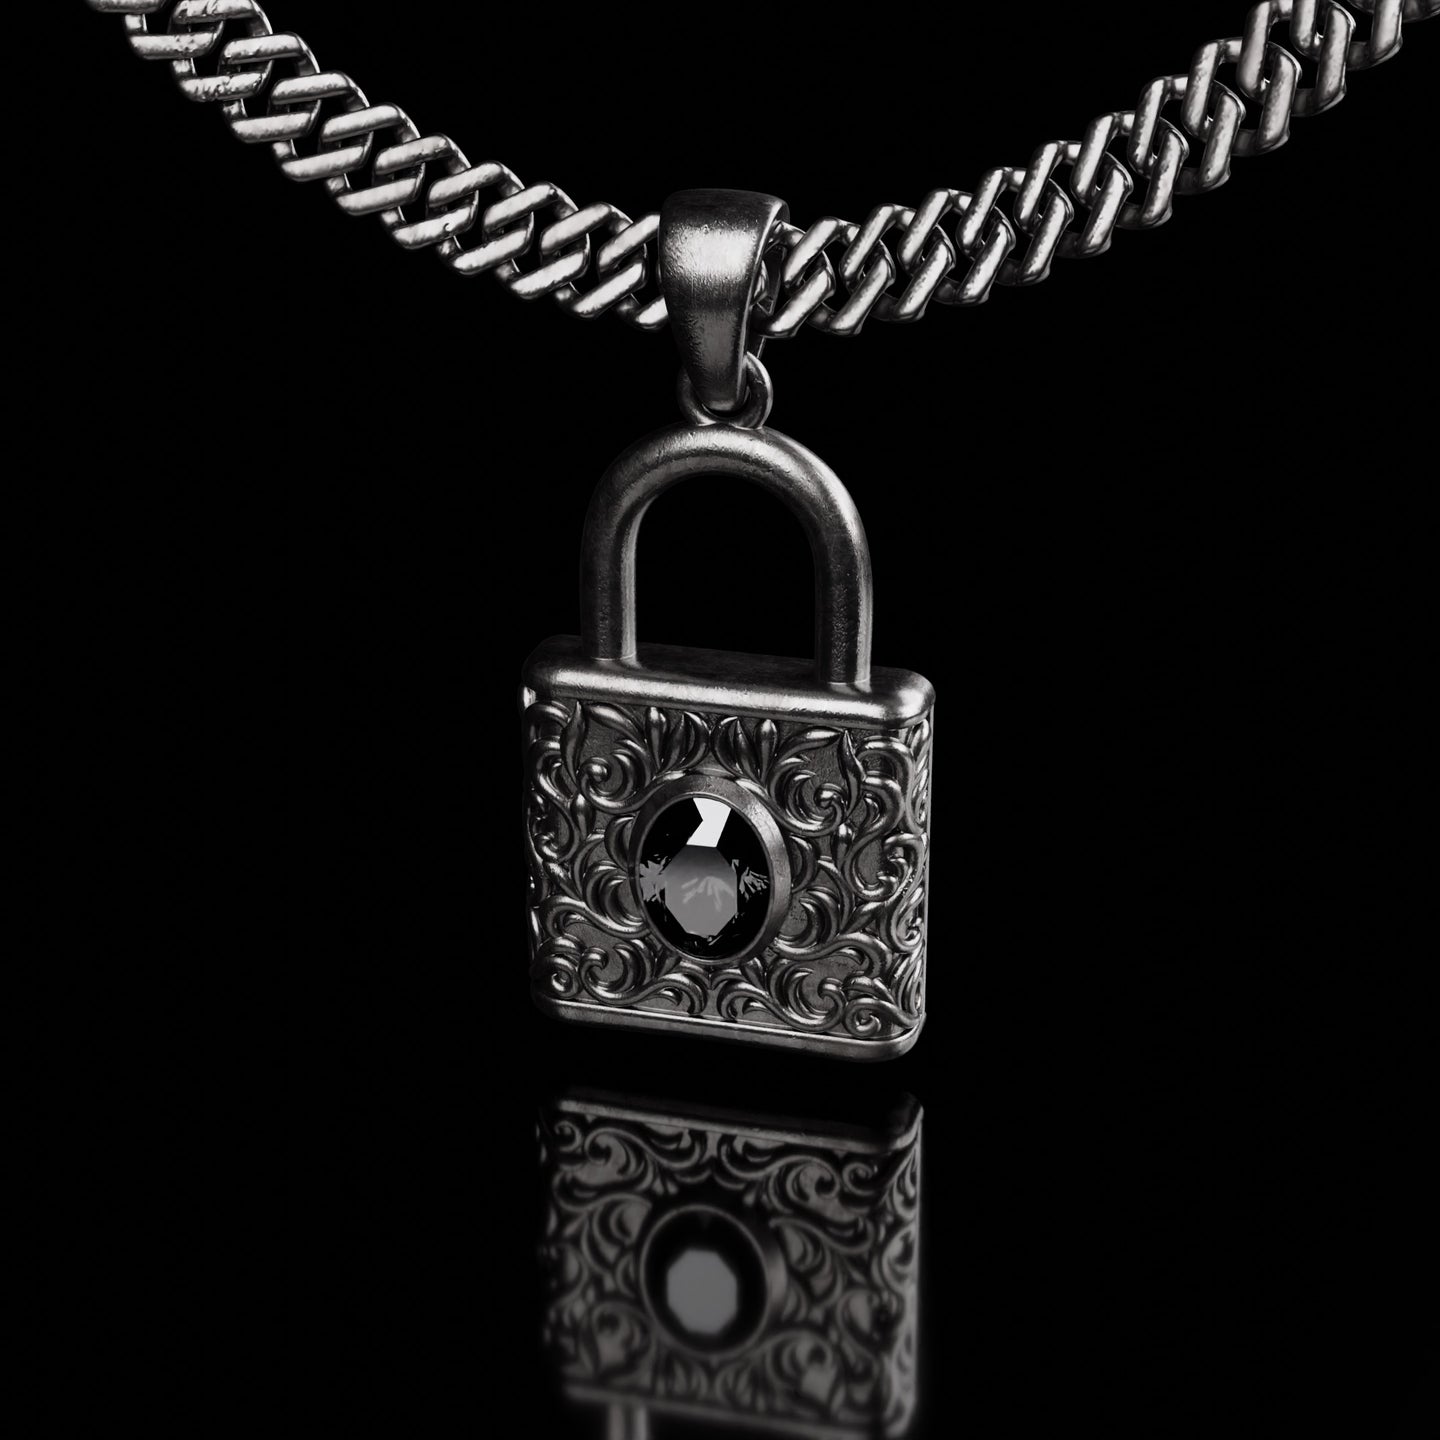 Amore Divino Lock Necklace - Fashion Jewelry by Yordy.